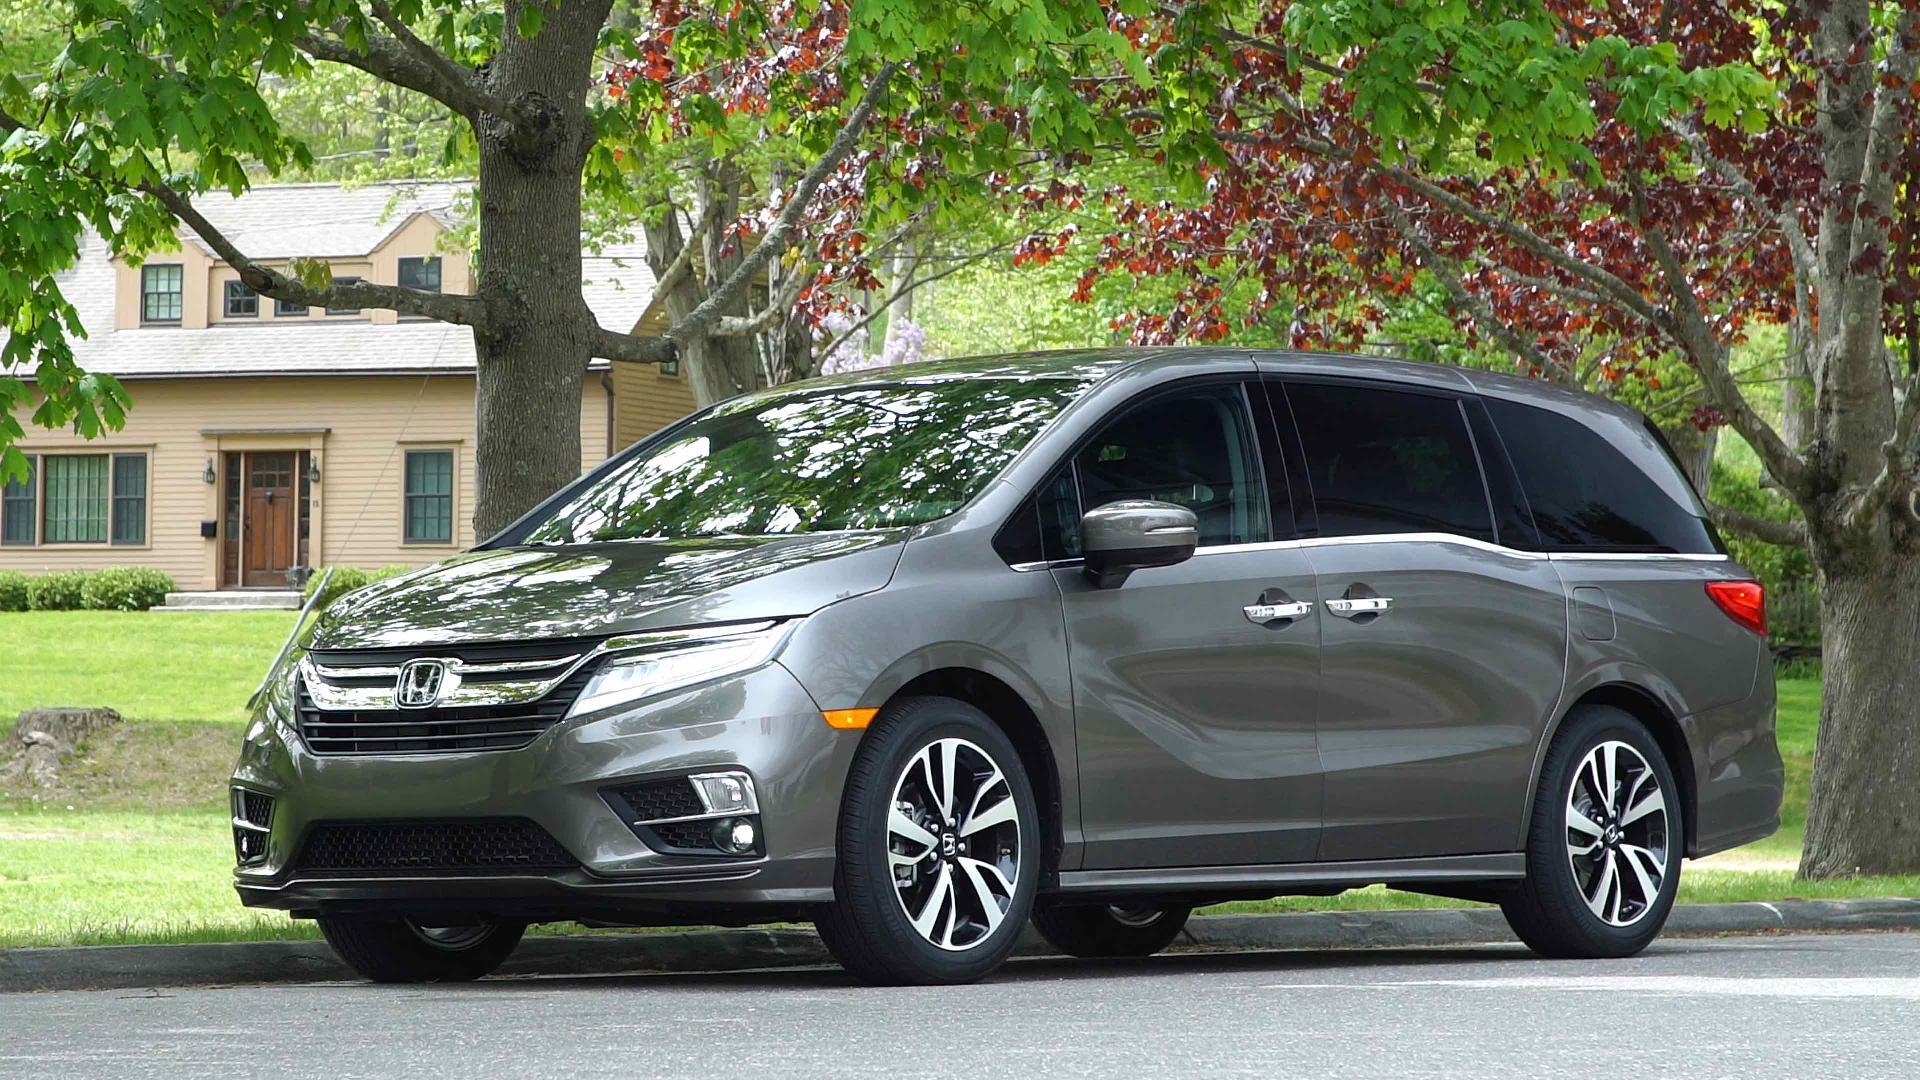 2018 Honda Odyssey Is Designed for Epic Road Trips - Consumer Reports